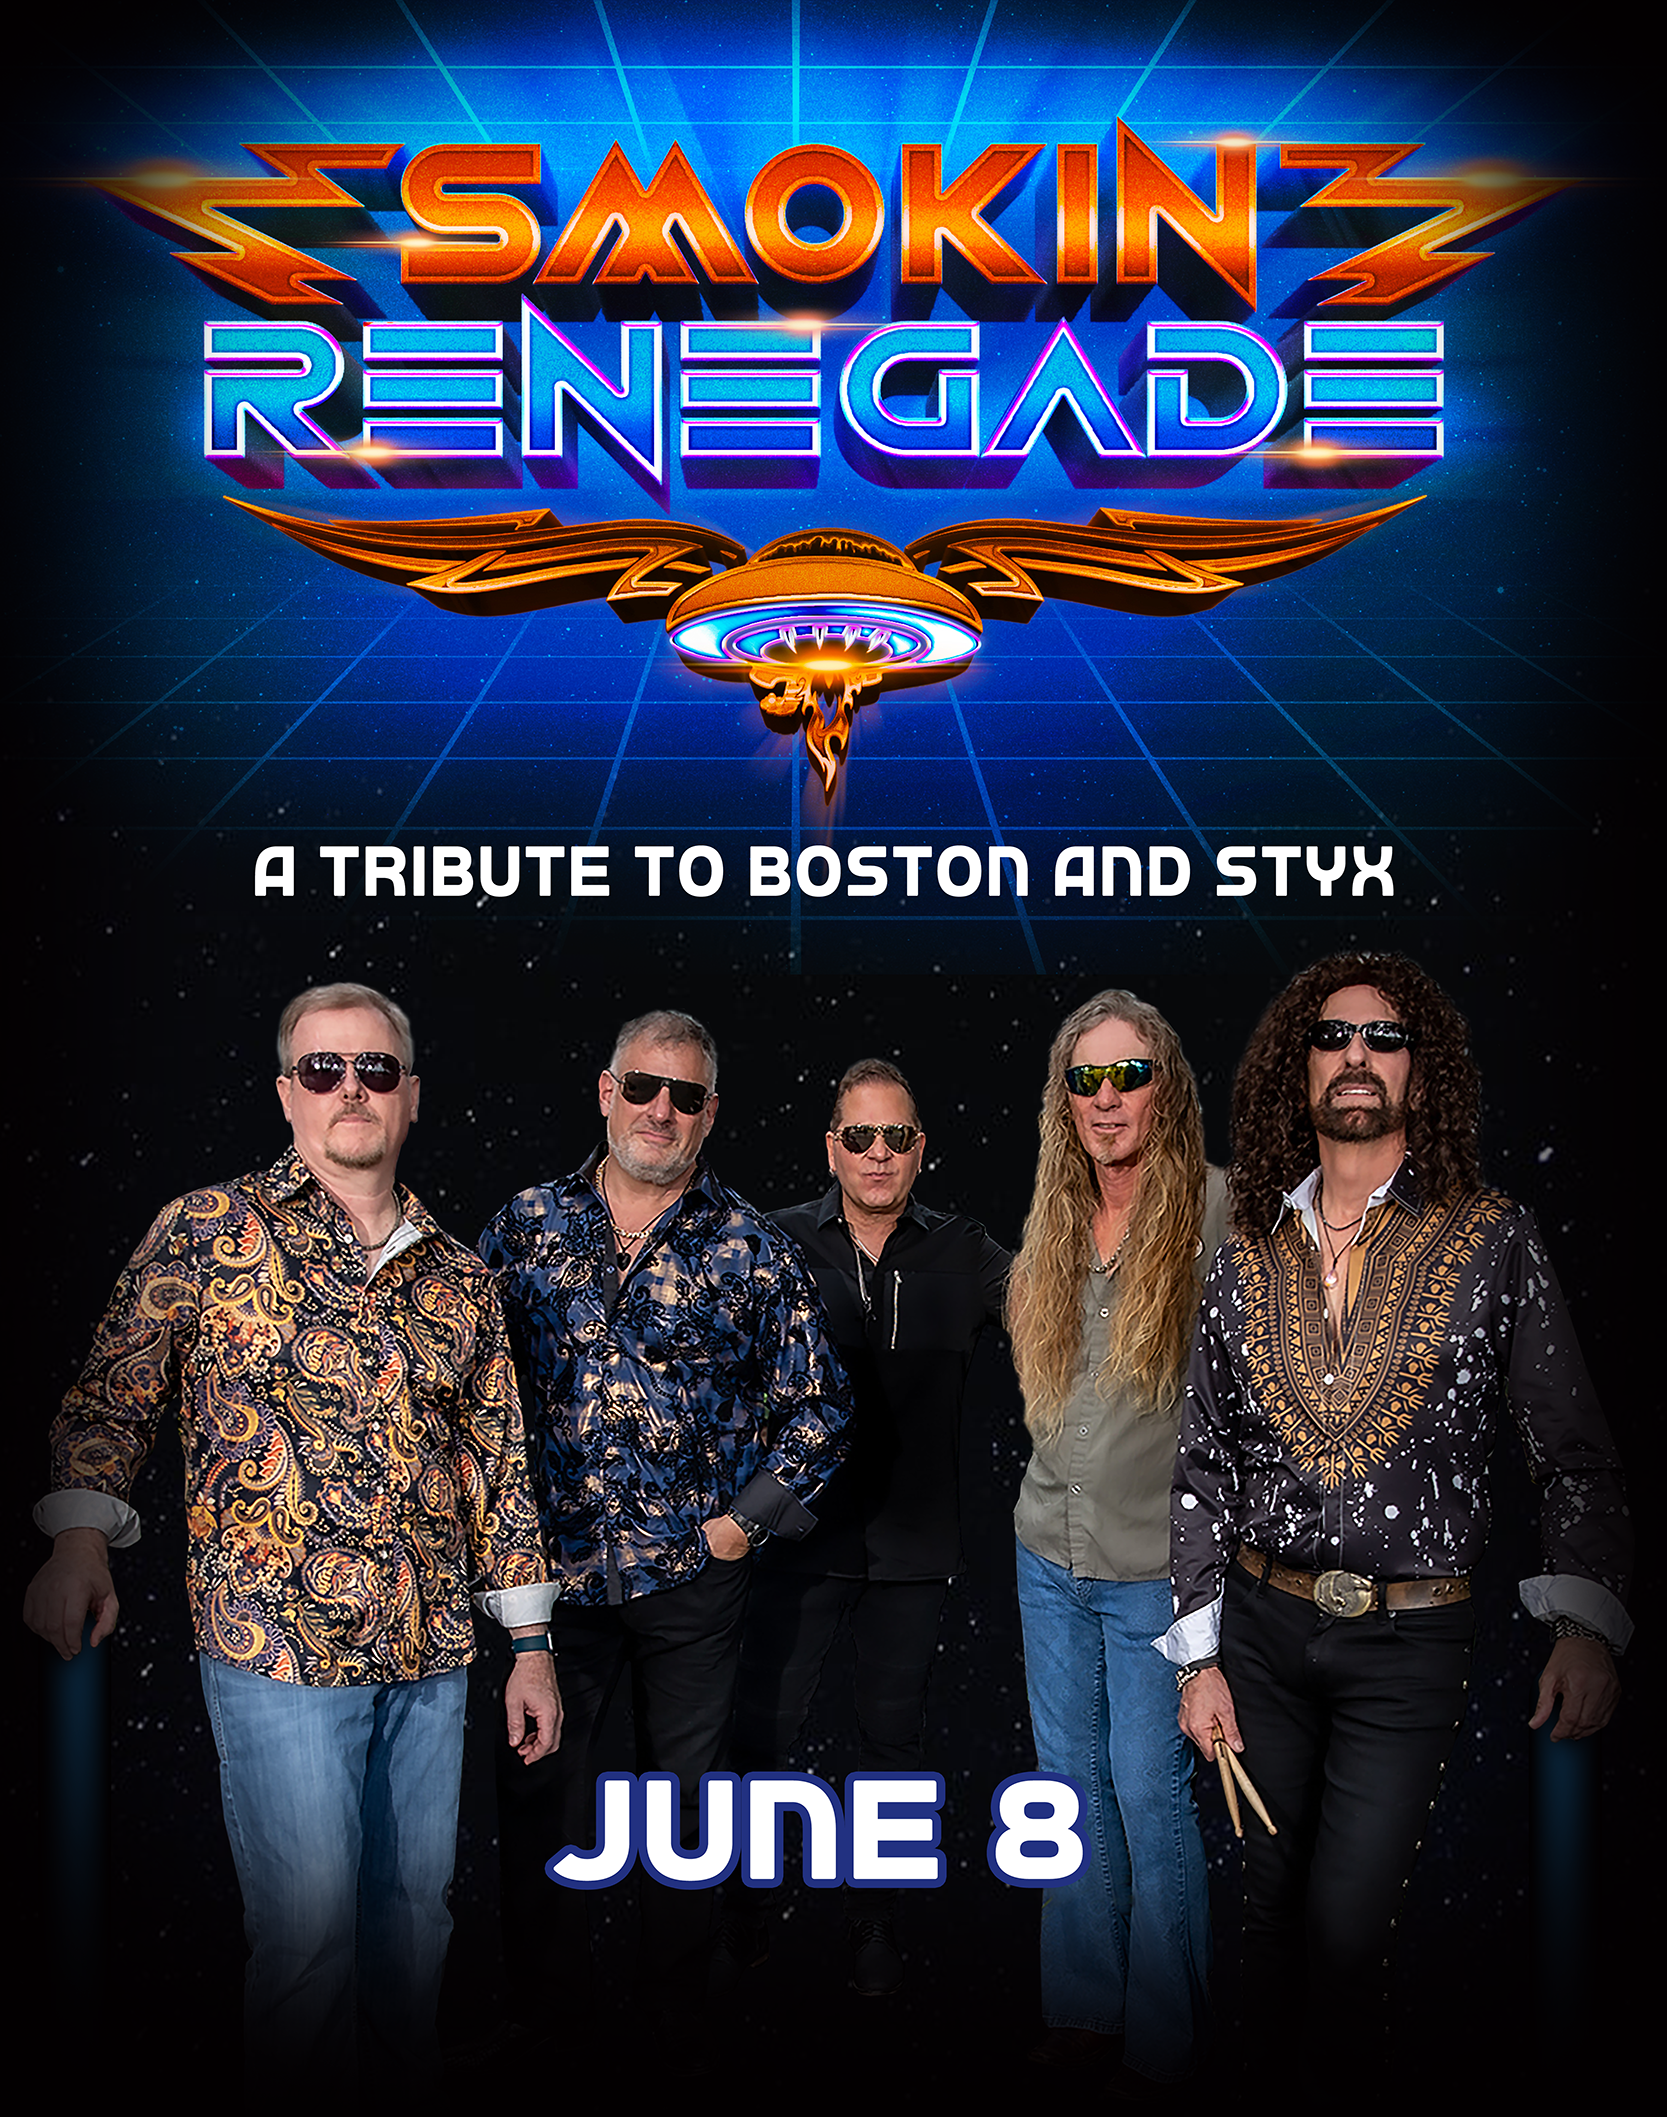 Smokin and Renegade, A tribute to Boston and Styx on June 8th